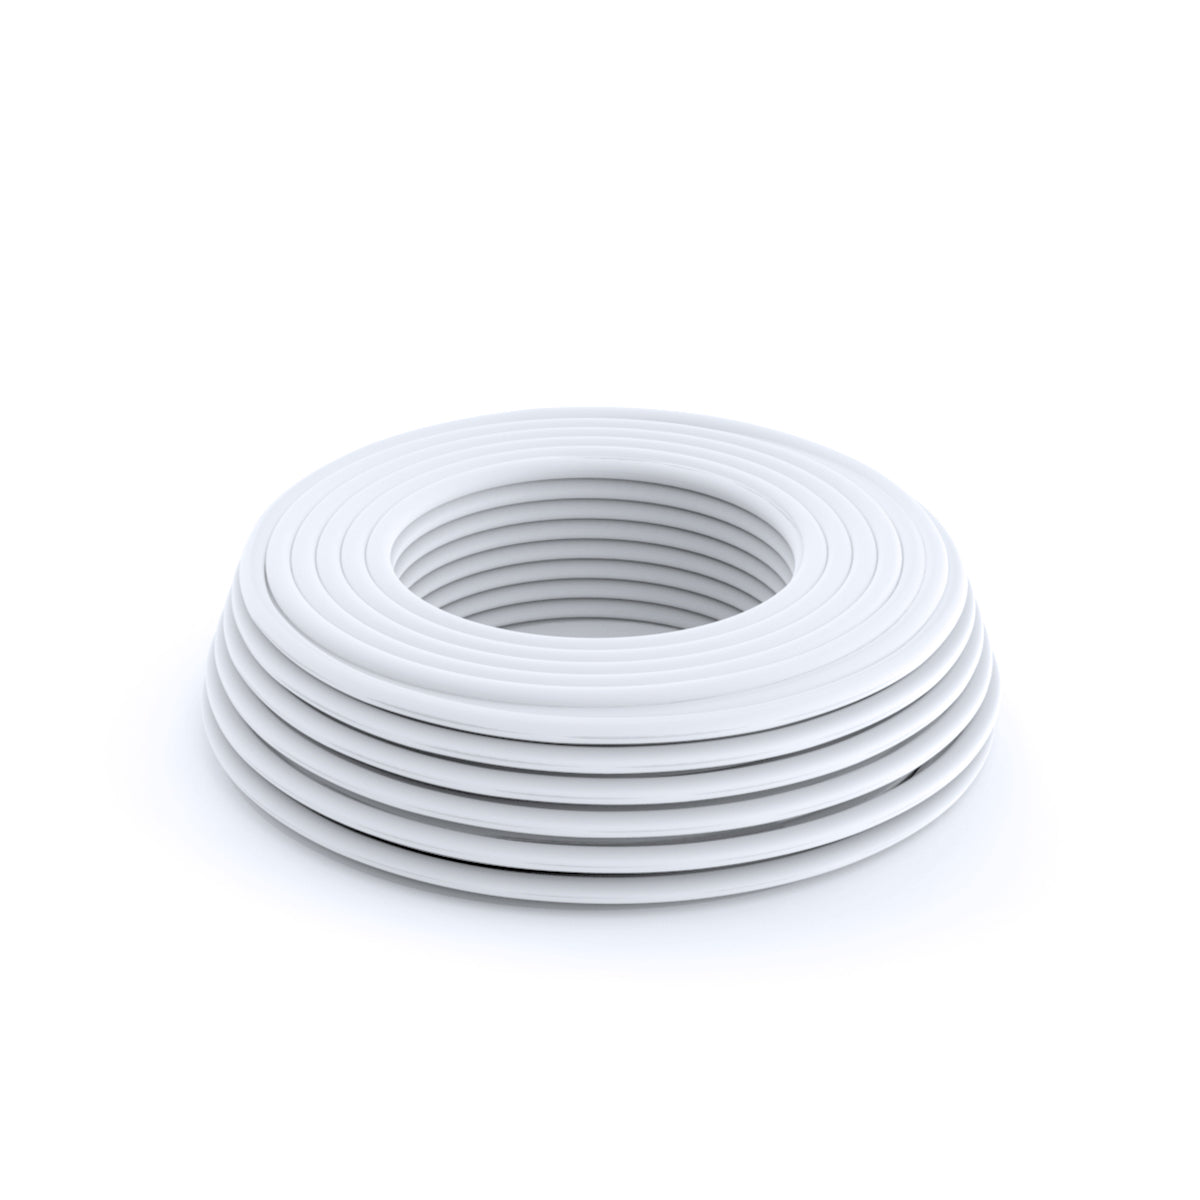 16-17mm Double Layer Tubing (per roll) (30m)